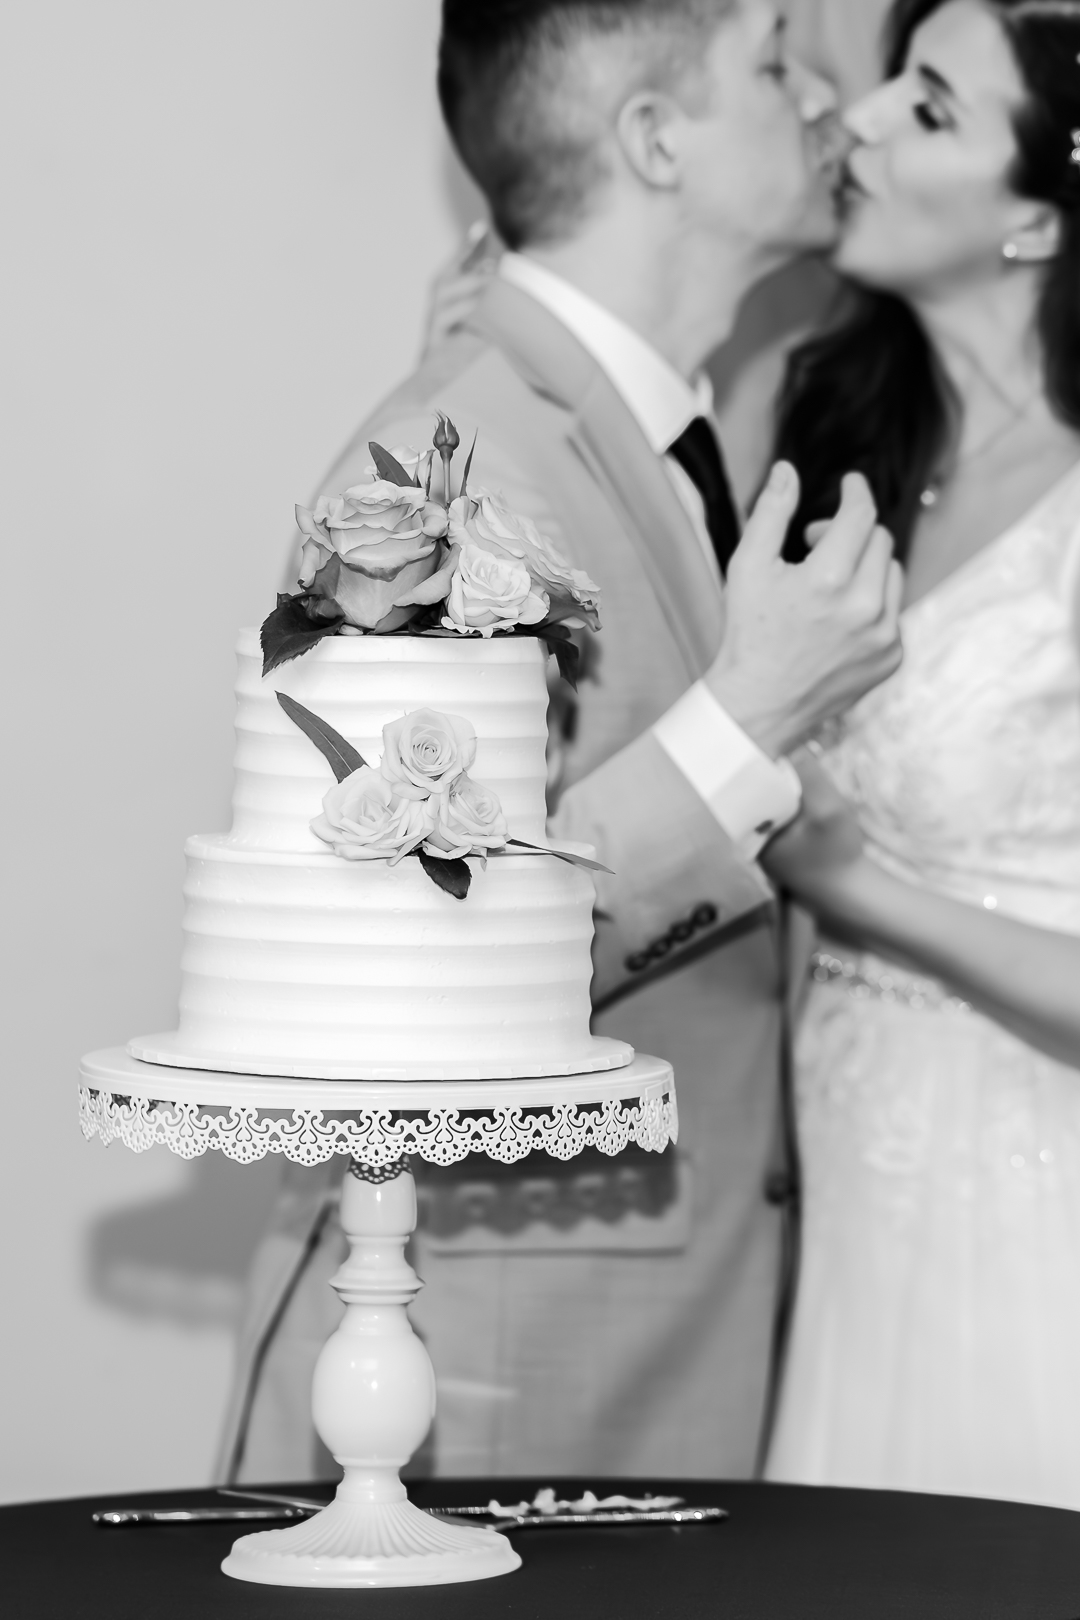 Cinematic black and white wedding photography with cake